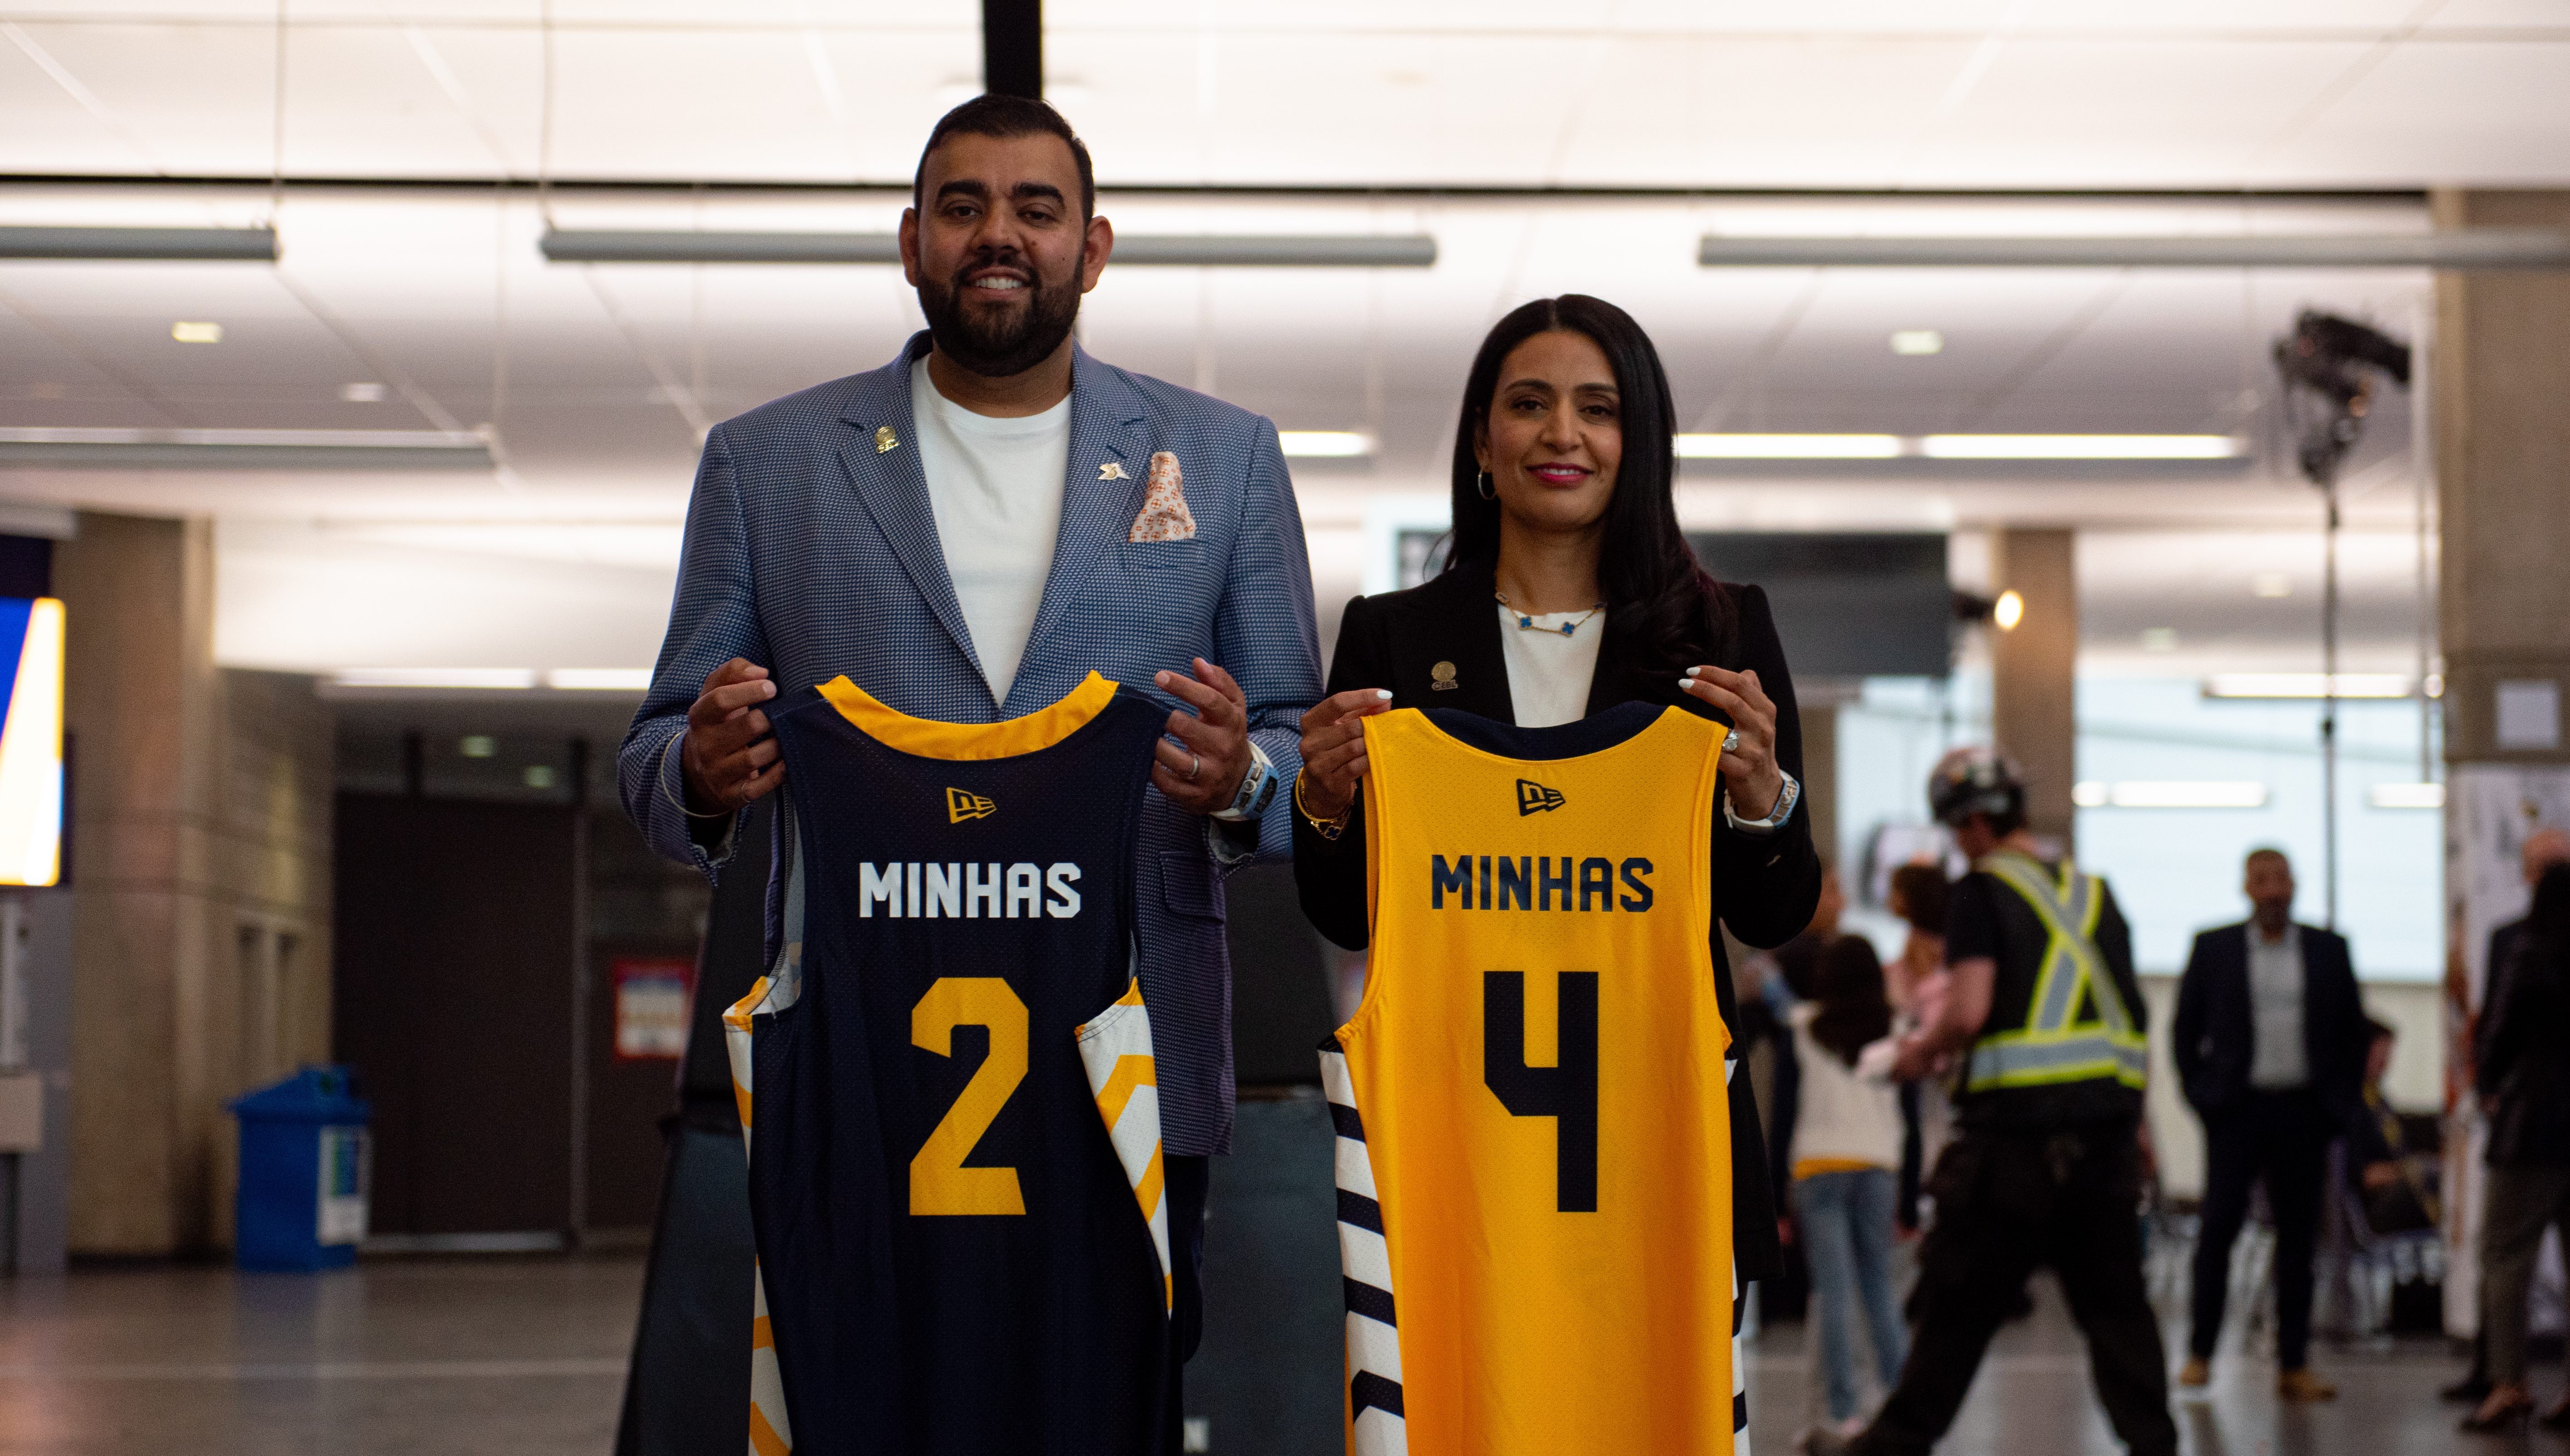 Manjit Minhas becomes 1st female owner in CEBL history with Edmonton Stingers